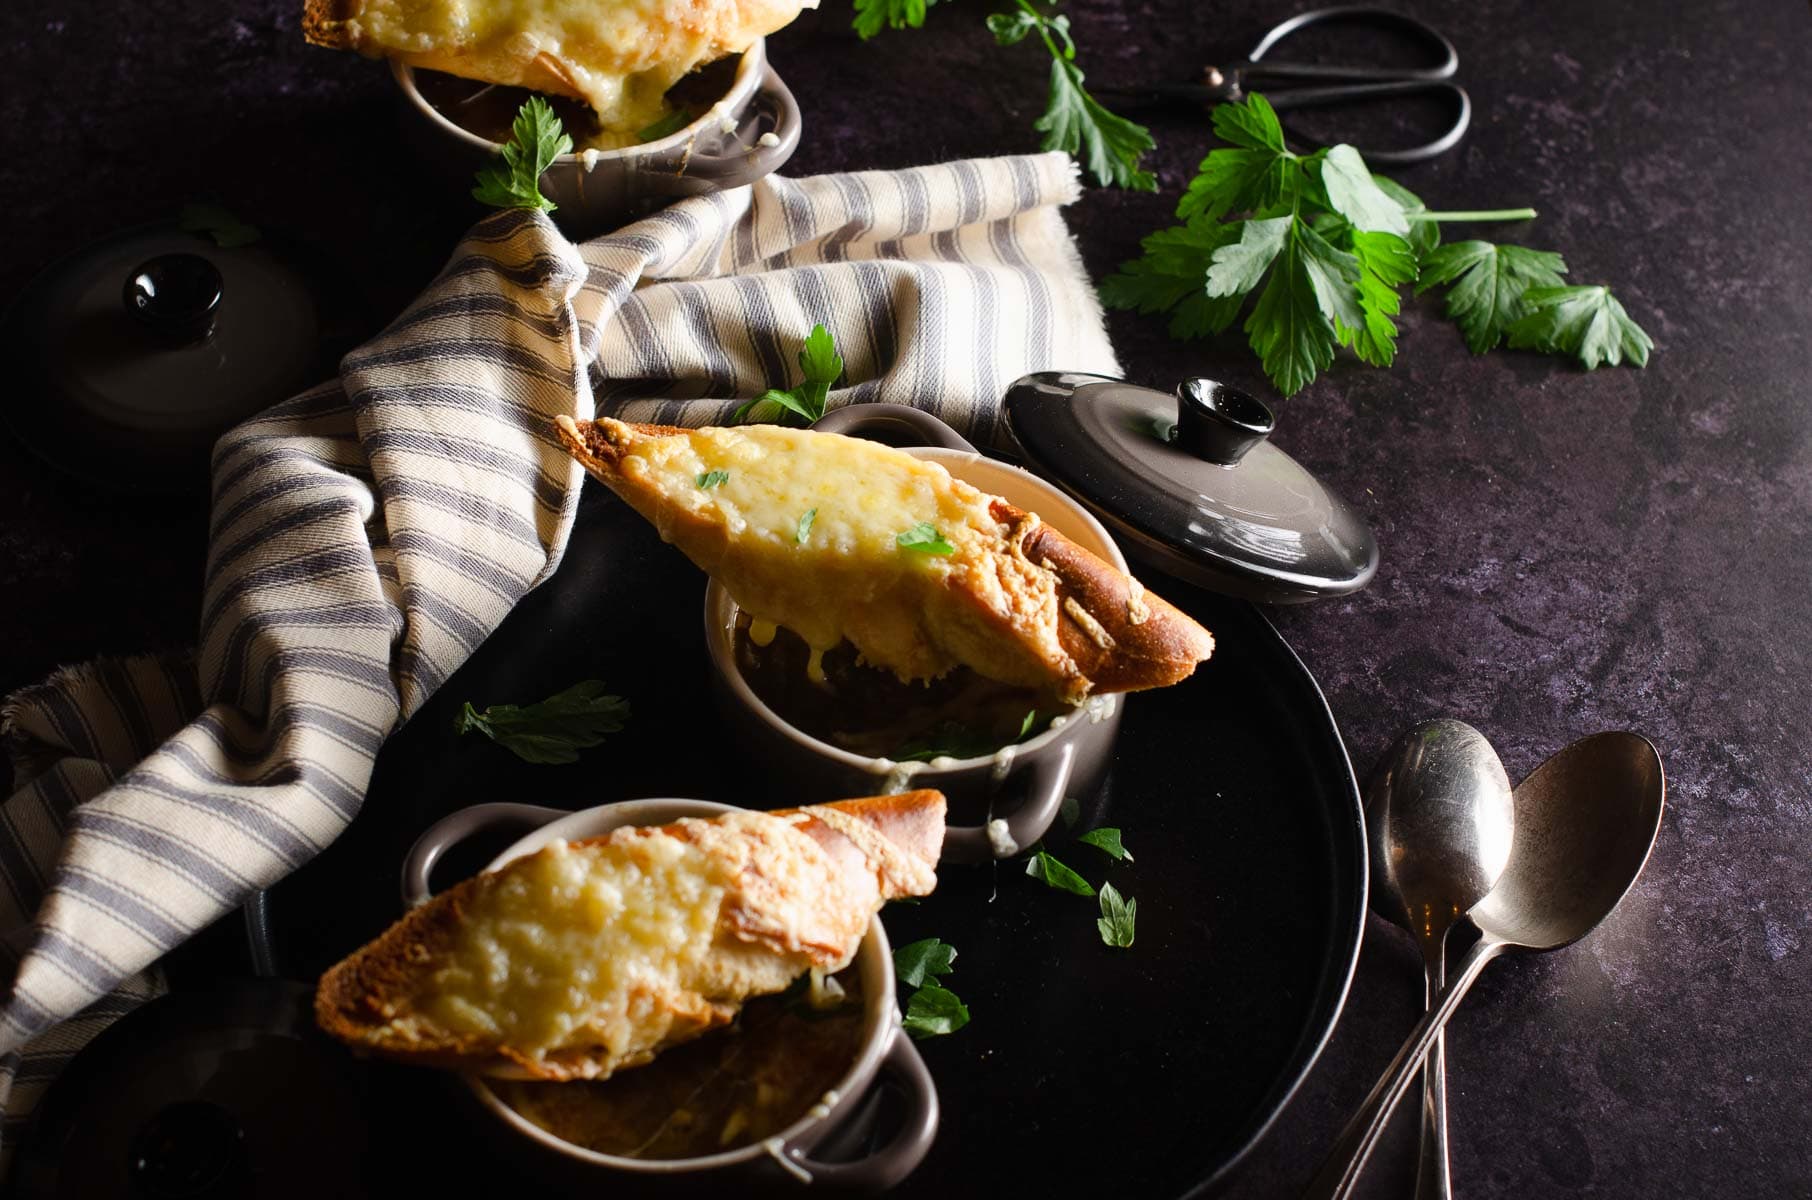 A dark scene of french onion soup bowls topped with toasted bread and melted cheese on a black surface.